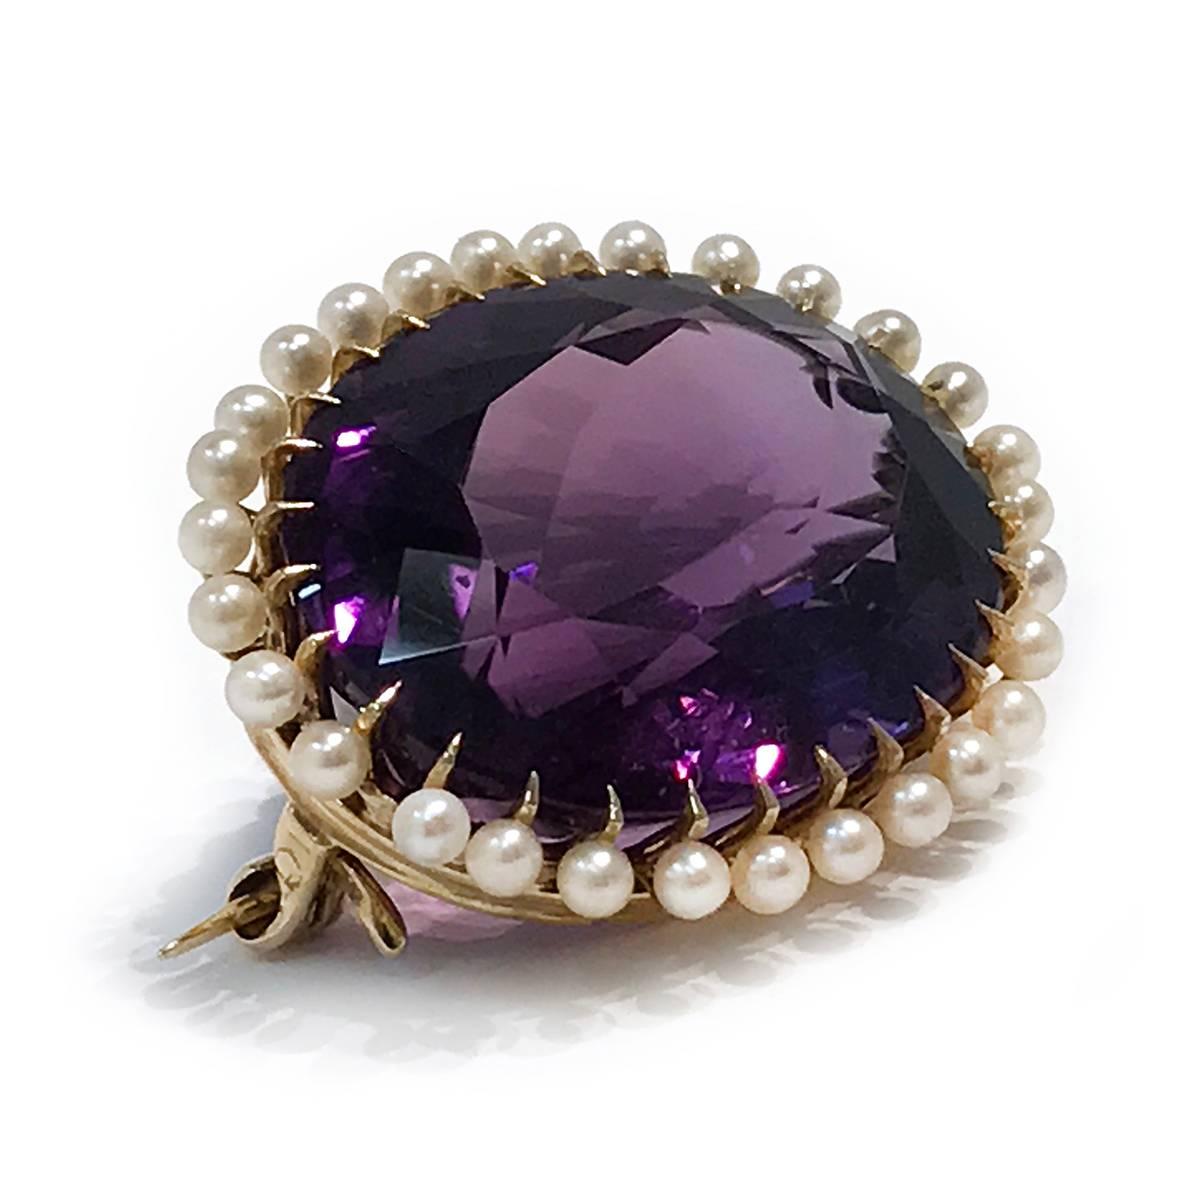 Edwardian 14 Karat Yellow Gold Amethyst and Seed Pearls Brooch. The oval-cut center Amethyst has a total carat weight of 22.97 carats, it's bezel and prong-set with twenty-nine (29) 2mm seed pearls surround. The total weight of the brooch is 9.6